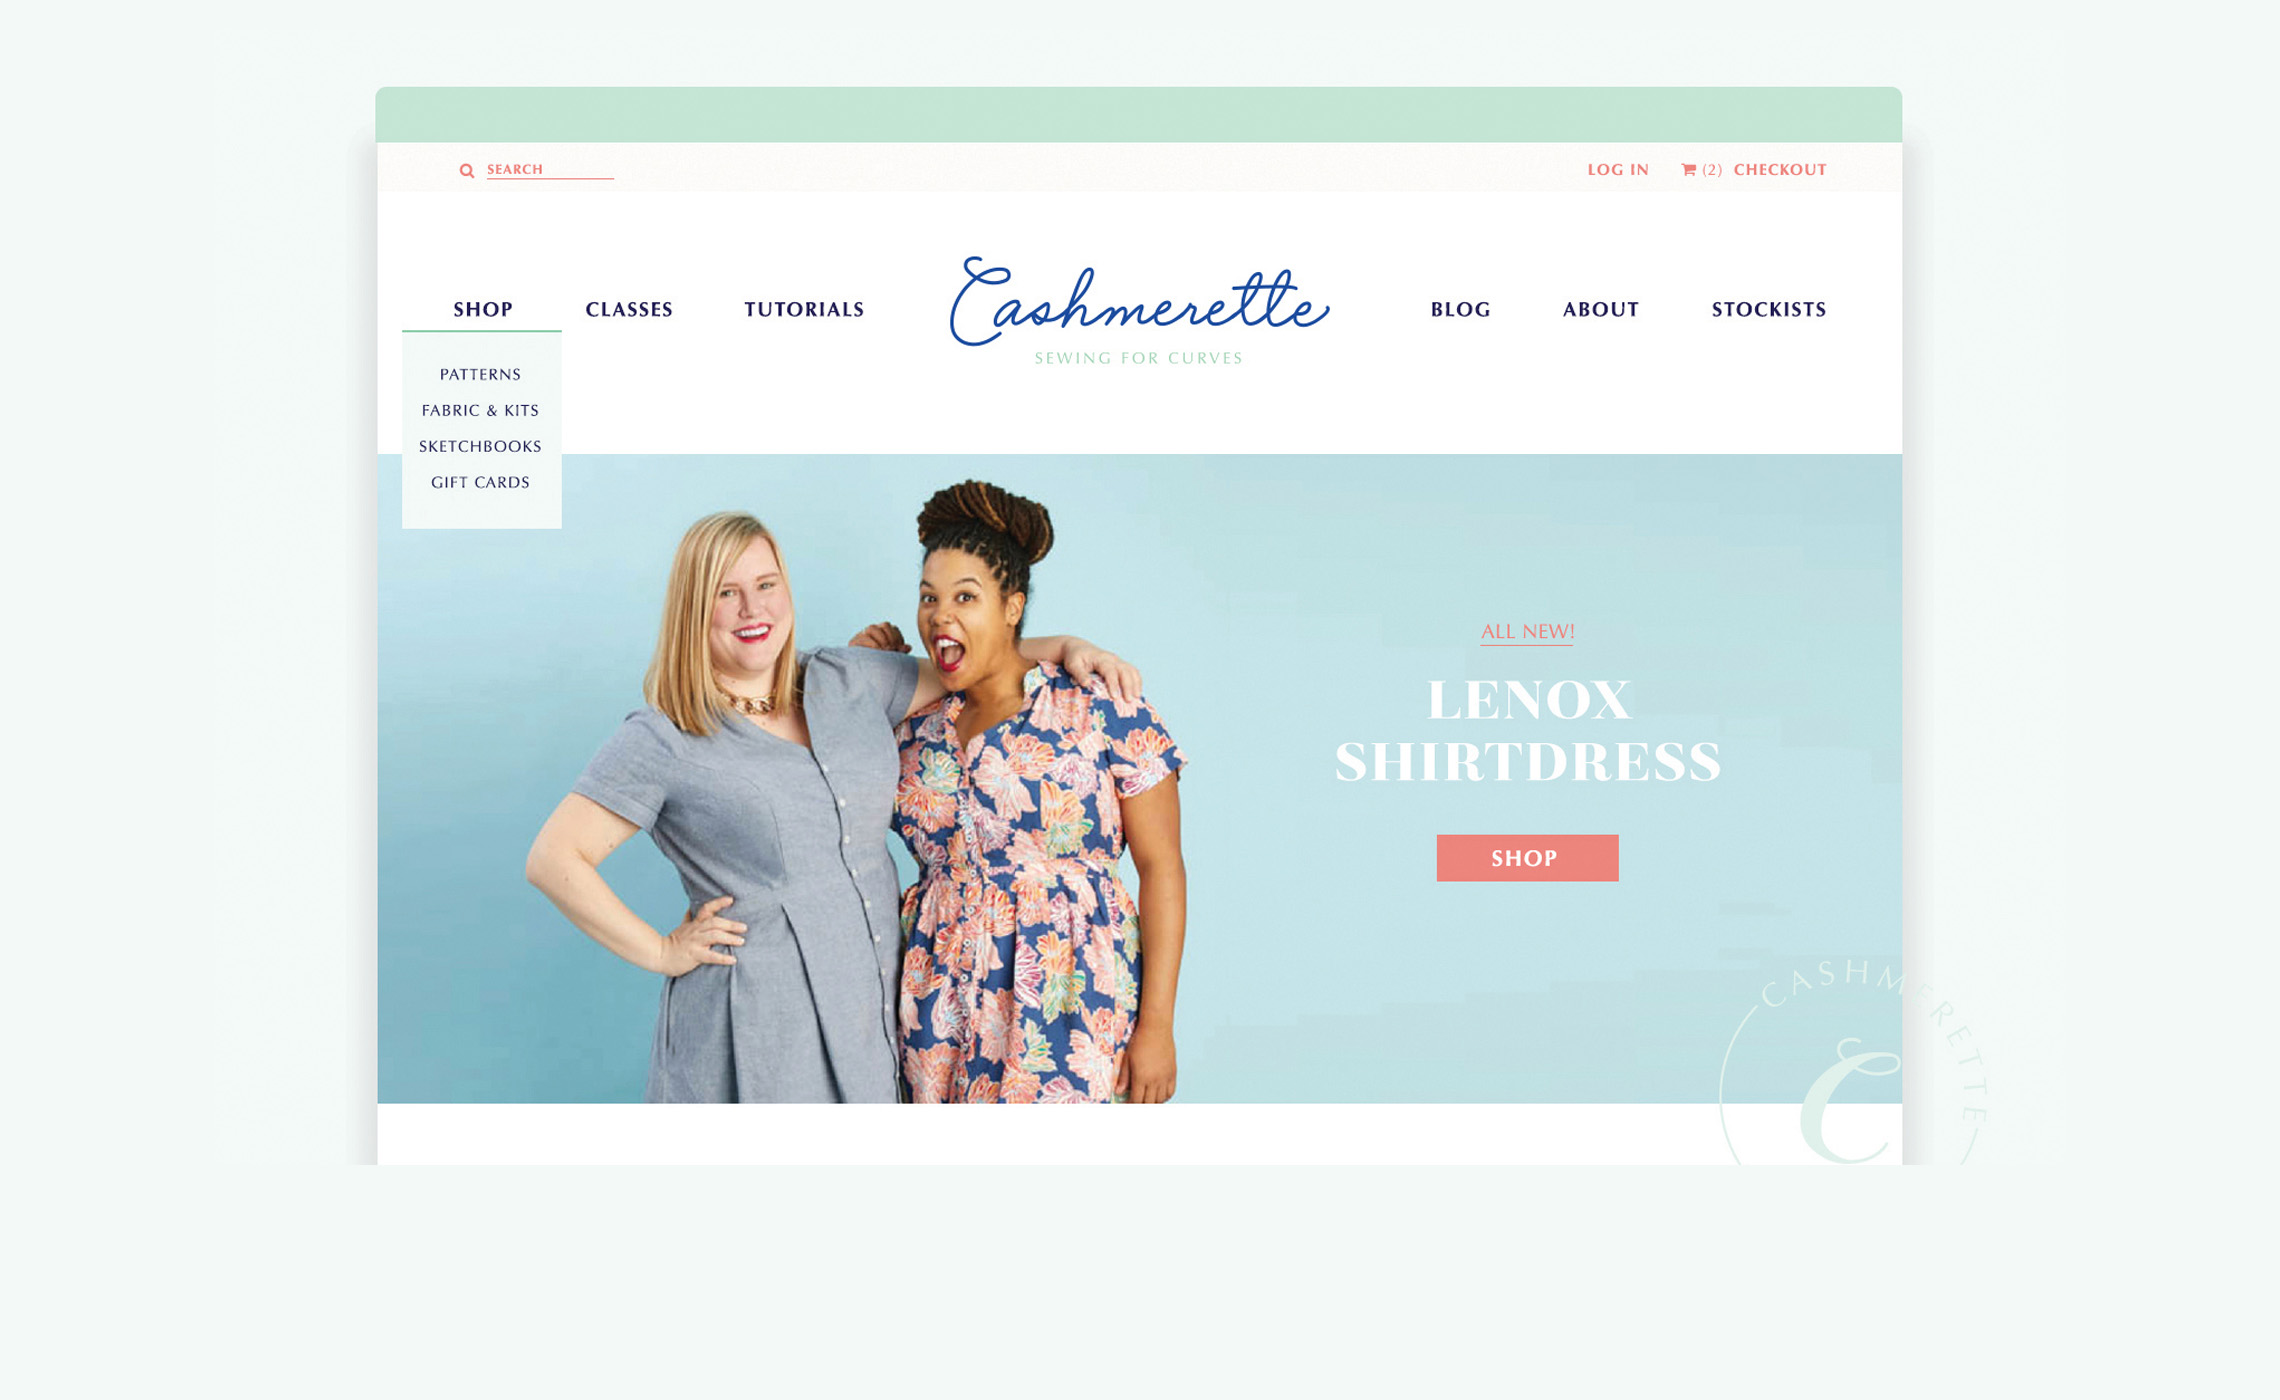 Cashmerette - Shopify website design for a plus size sewing brand moving from Wordpress to Shopify.